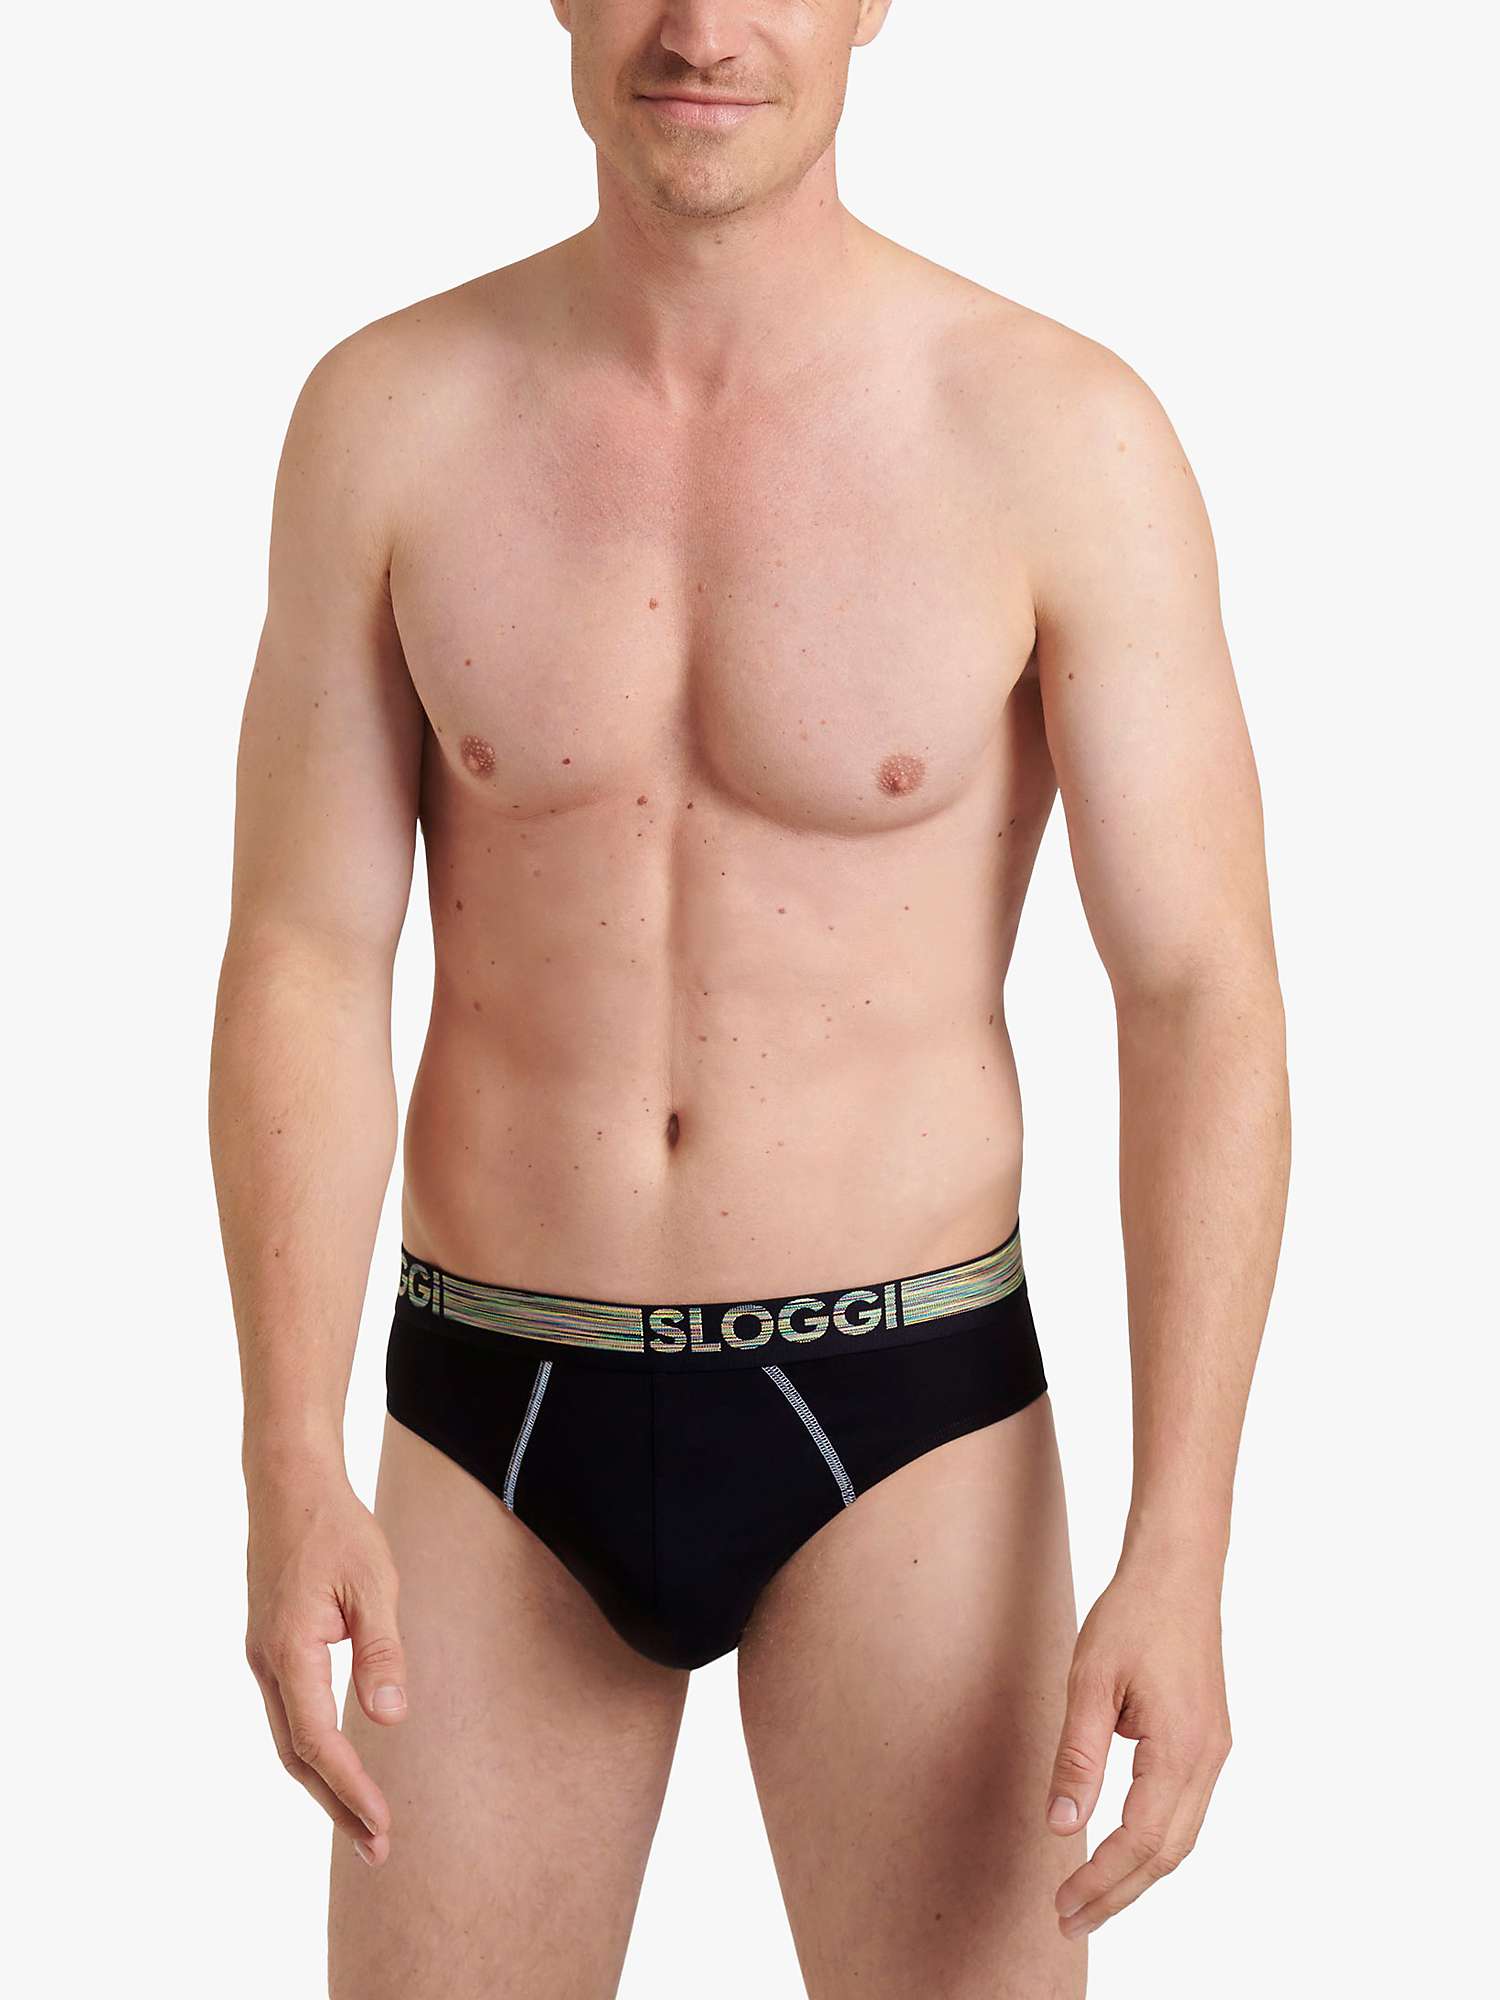 Buy sloggi GO ABC Natural Cotton Stretch Briefs, Pack of 2 Online at johnlewis.com